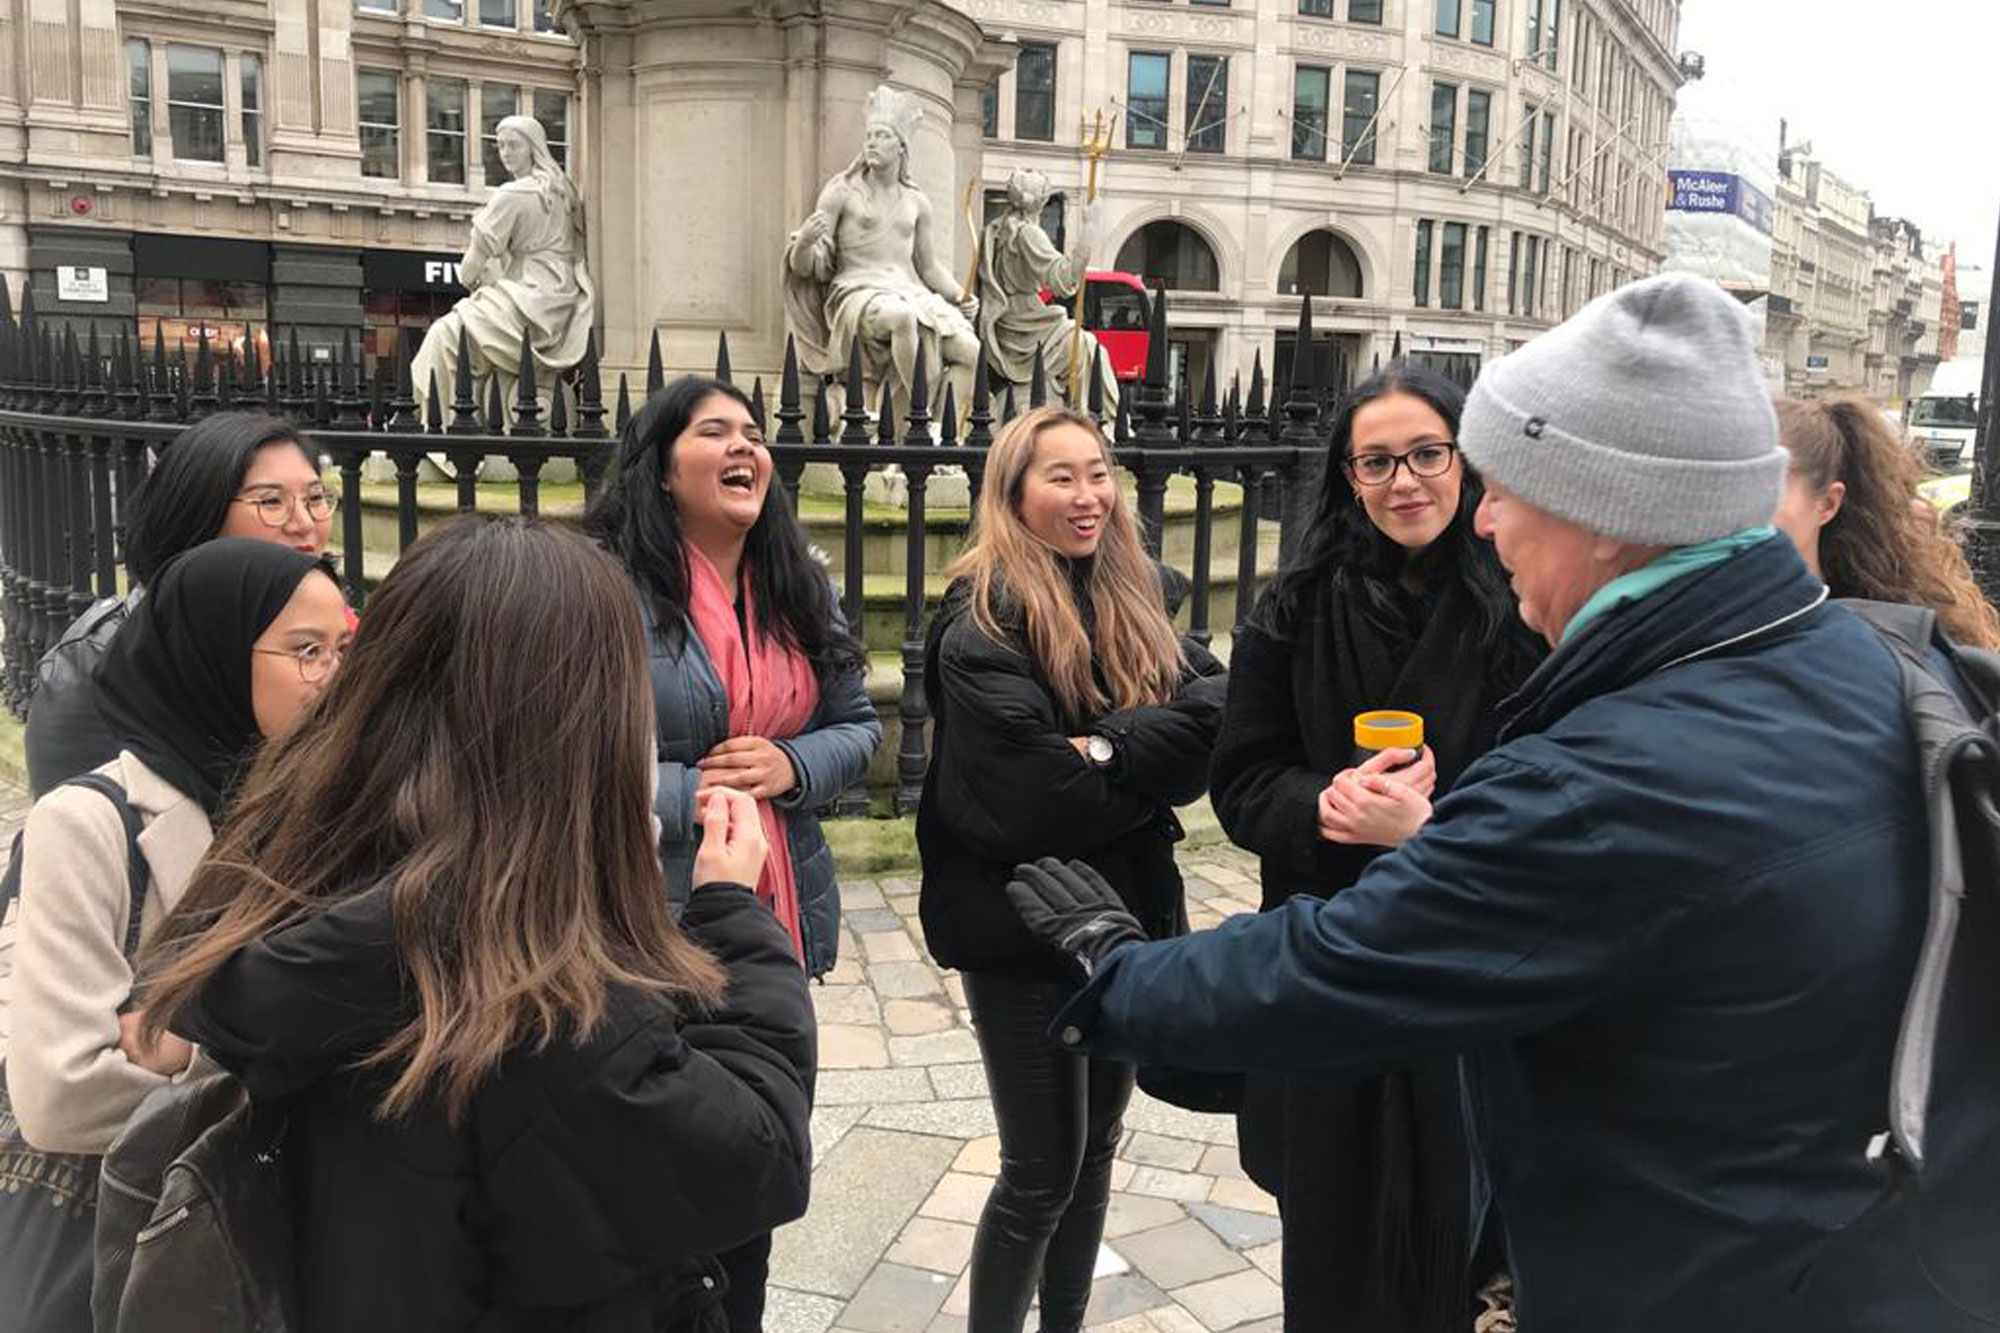 Students listen to financial expert in the streets of the City of London